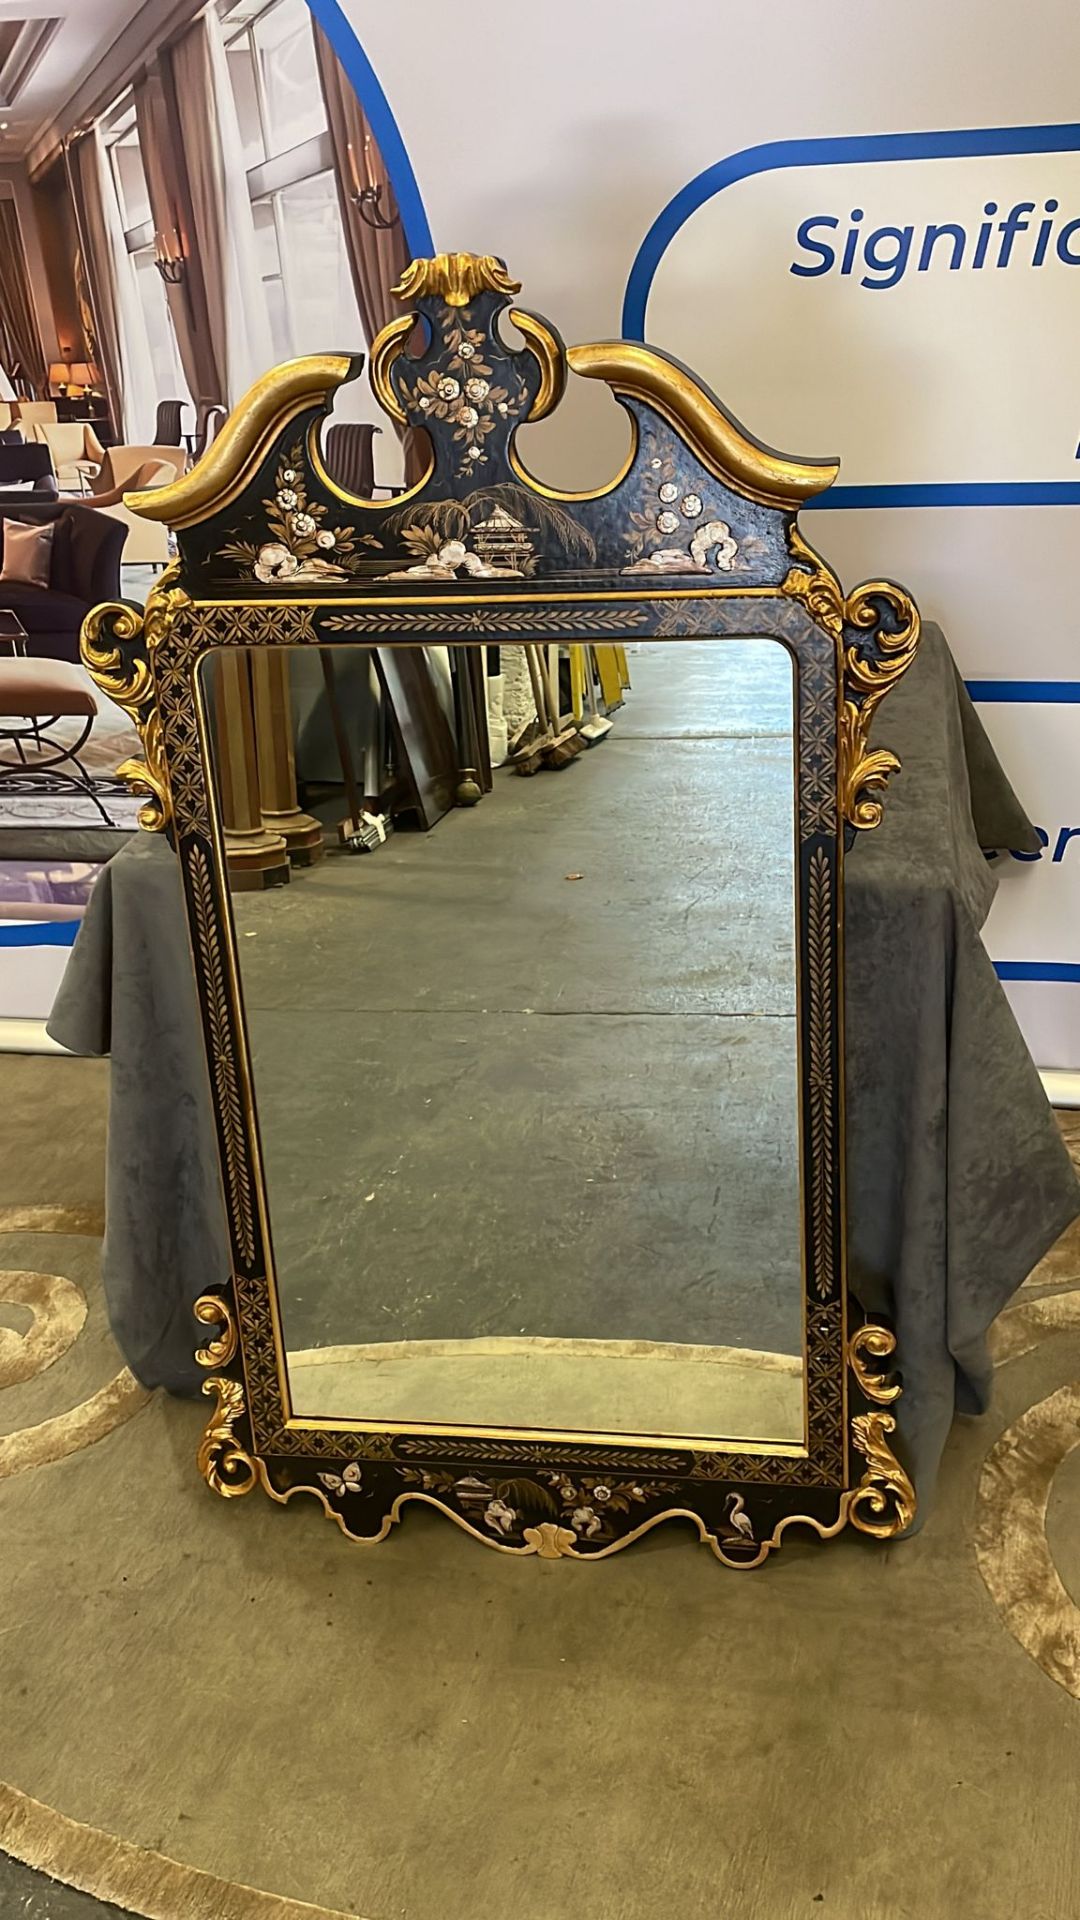 Chinoiserie black lacquer ornate carved mirror with gilt detail 72 x 125cm - Image 2 of 3